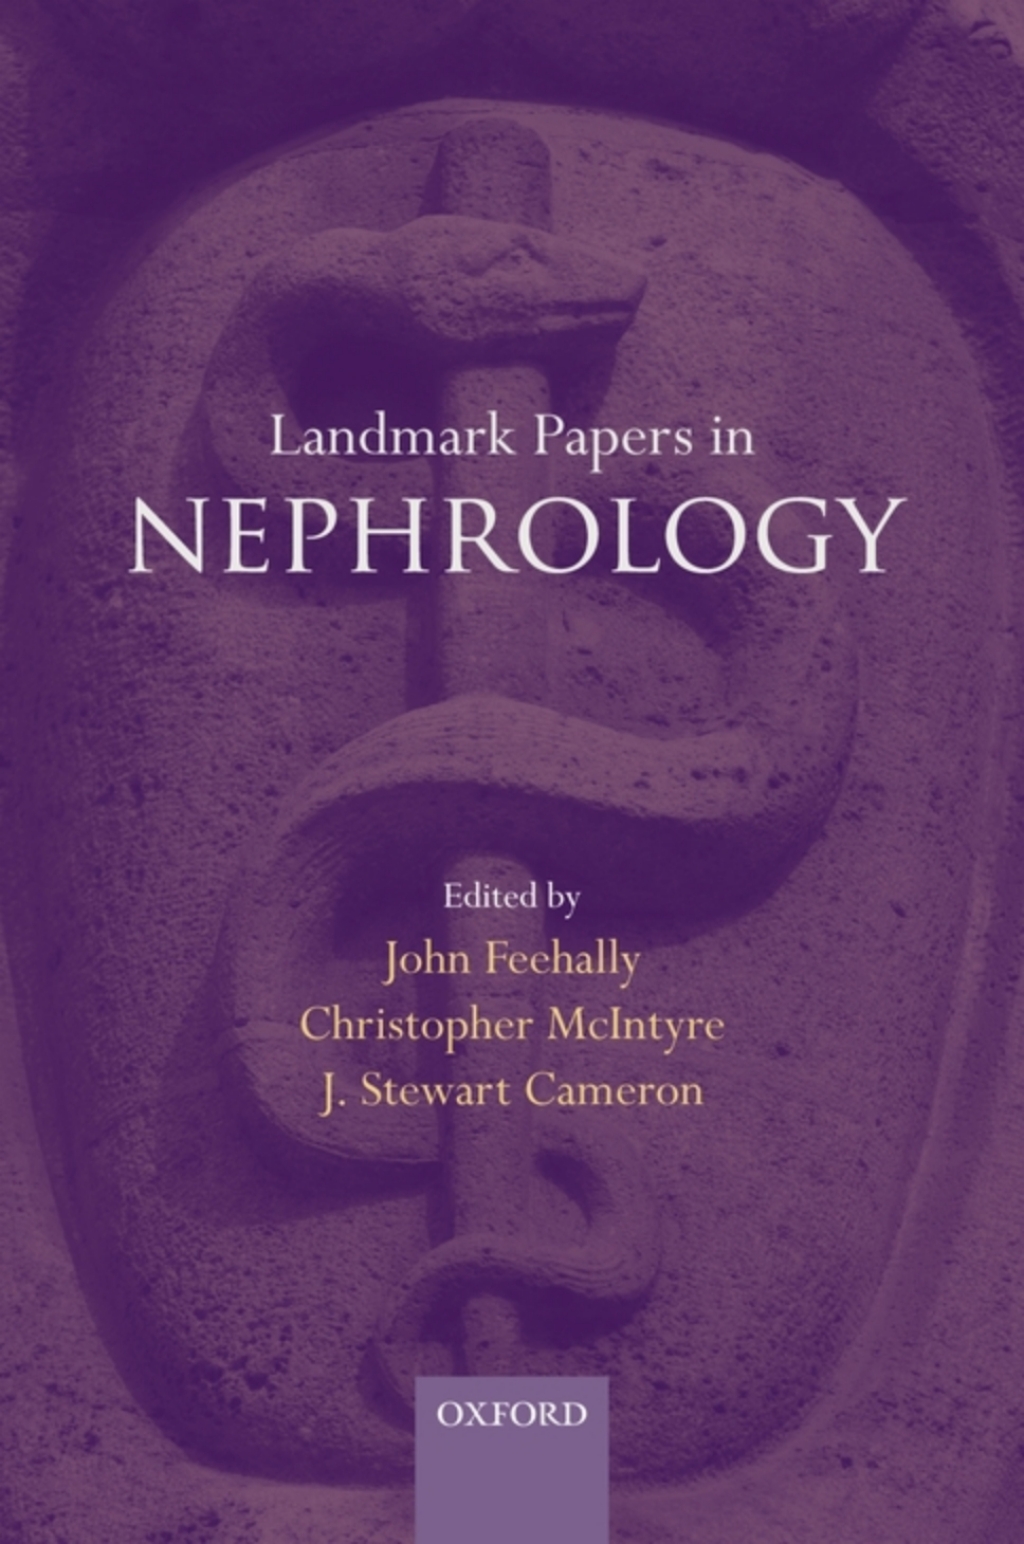 ISBN 9780199699254 product image for Landmark Papers in Nephrology - 1st Edition (eBook Rental) | upcitemdb.com